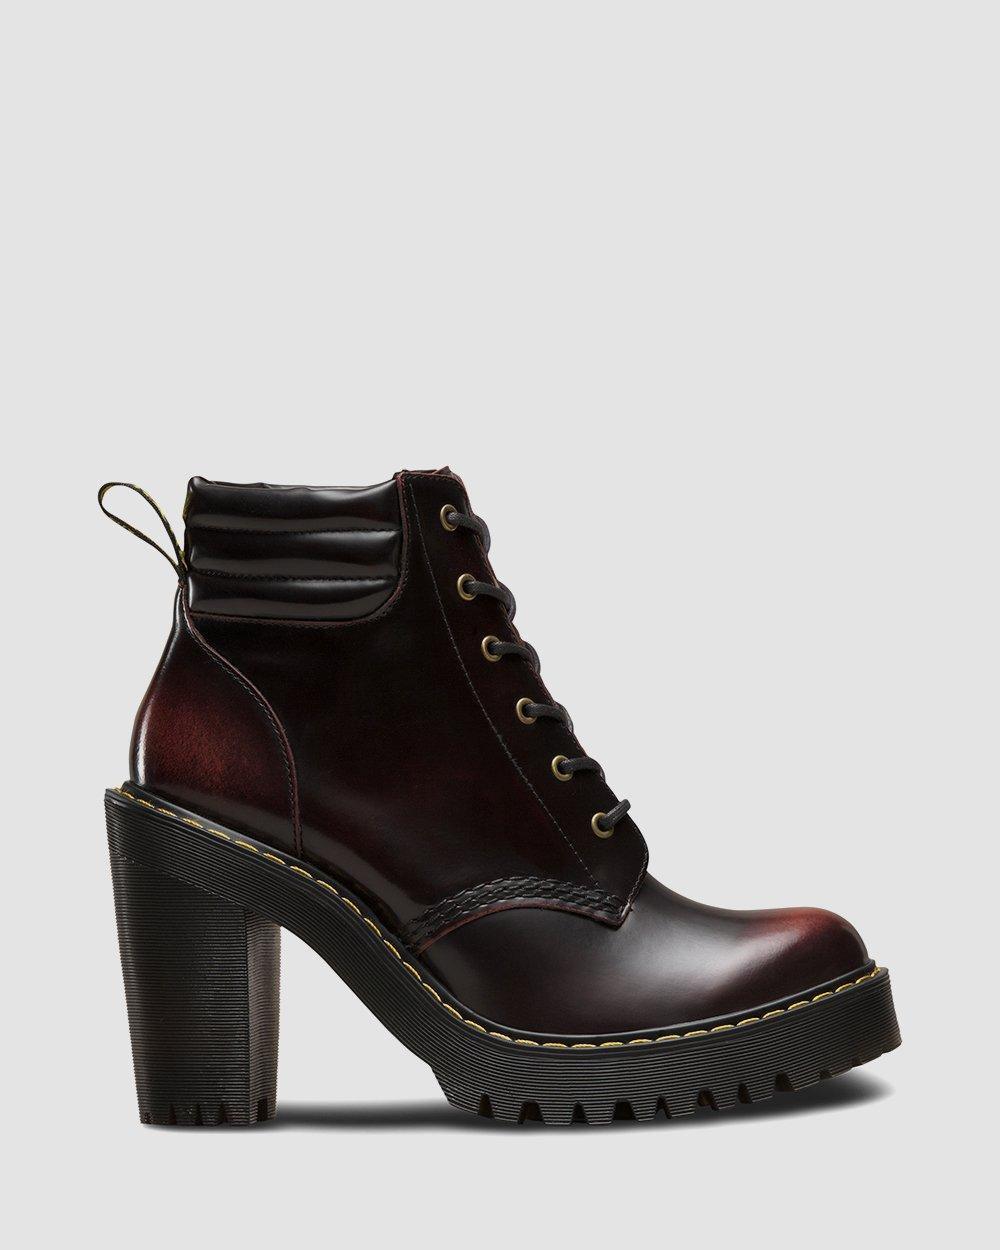 PERSEPHONE ARCADIA, Cherry Red | Dr. Martens